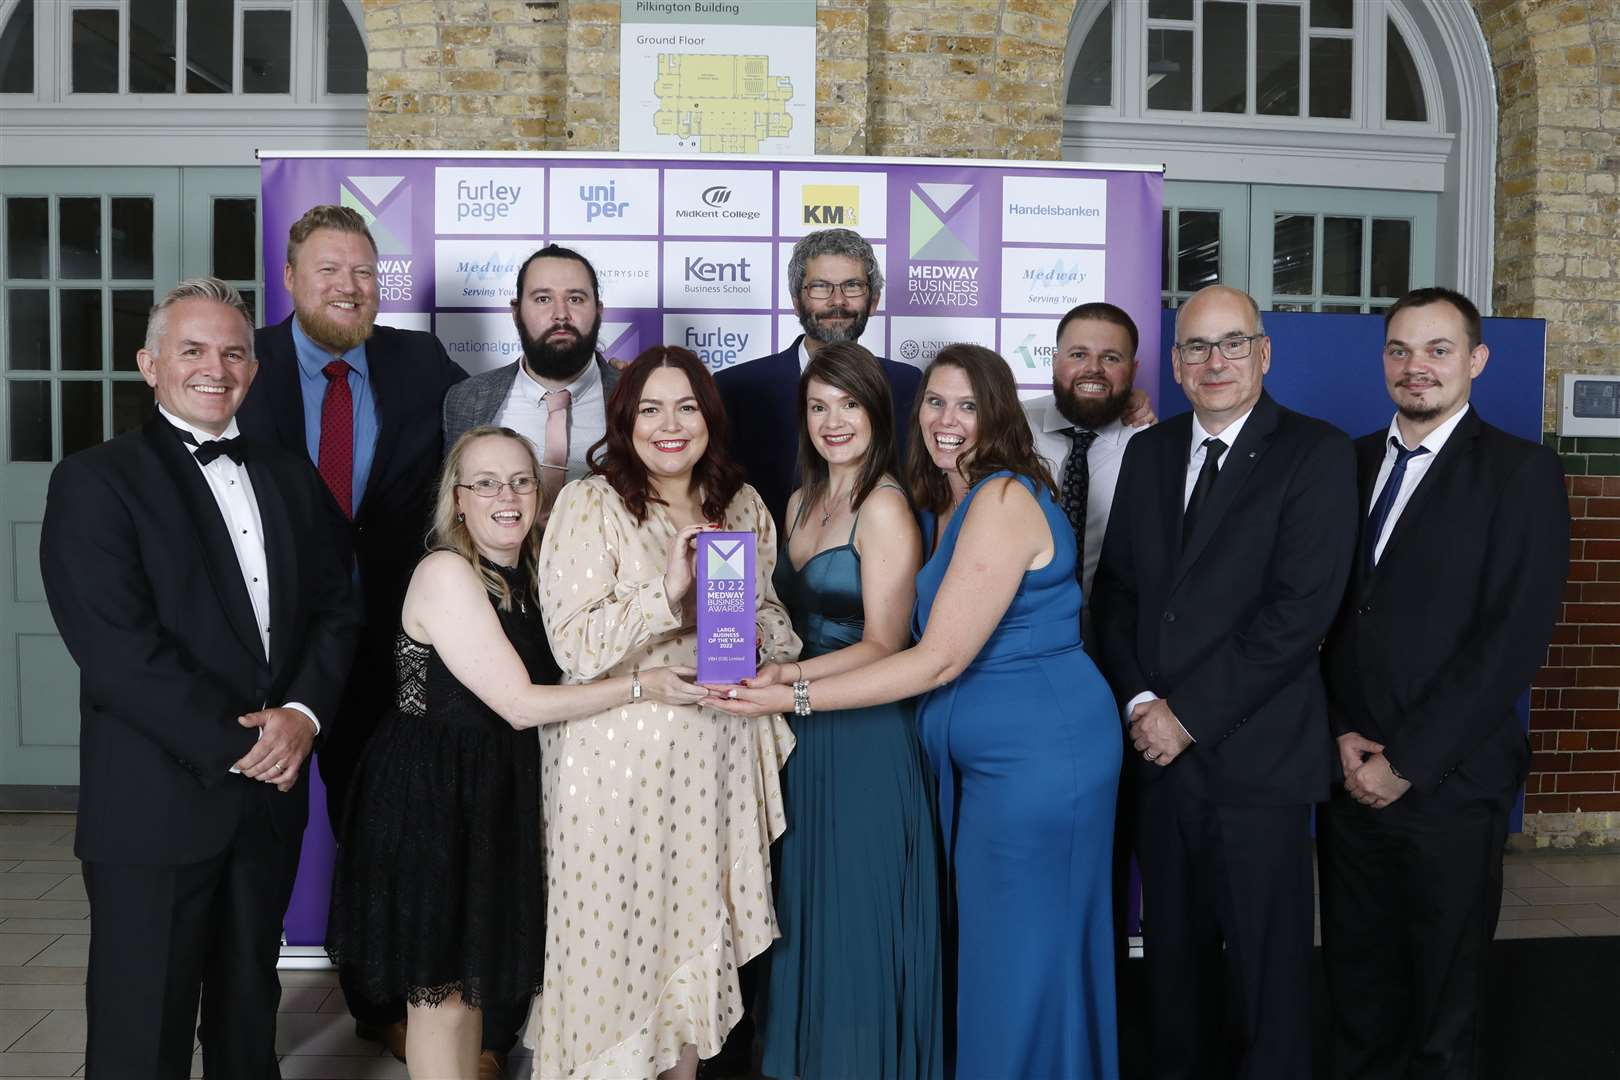 The Large Business of the Year winners